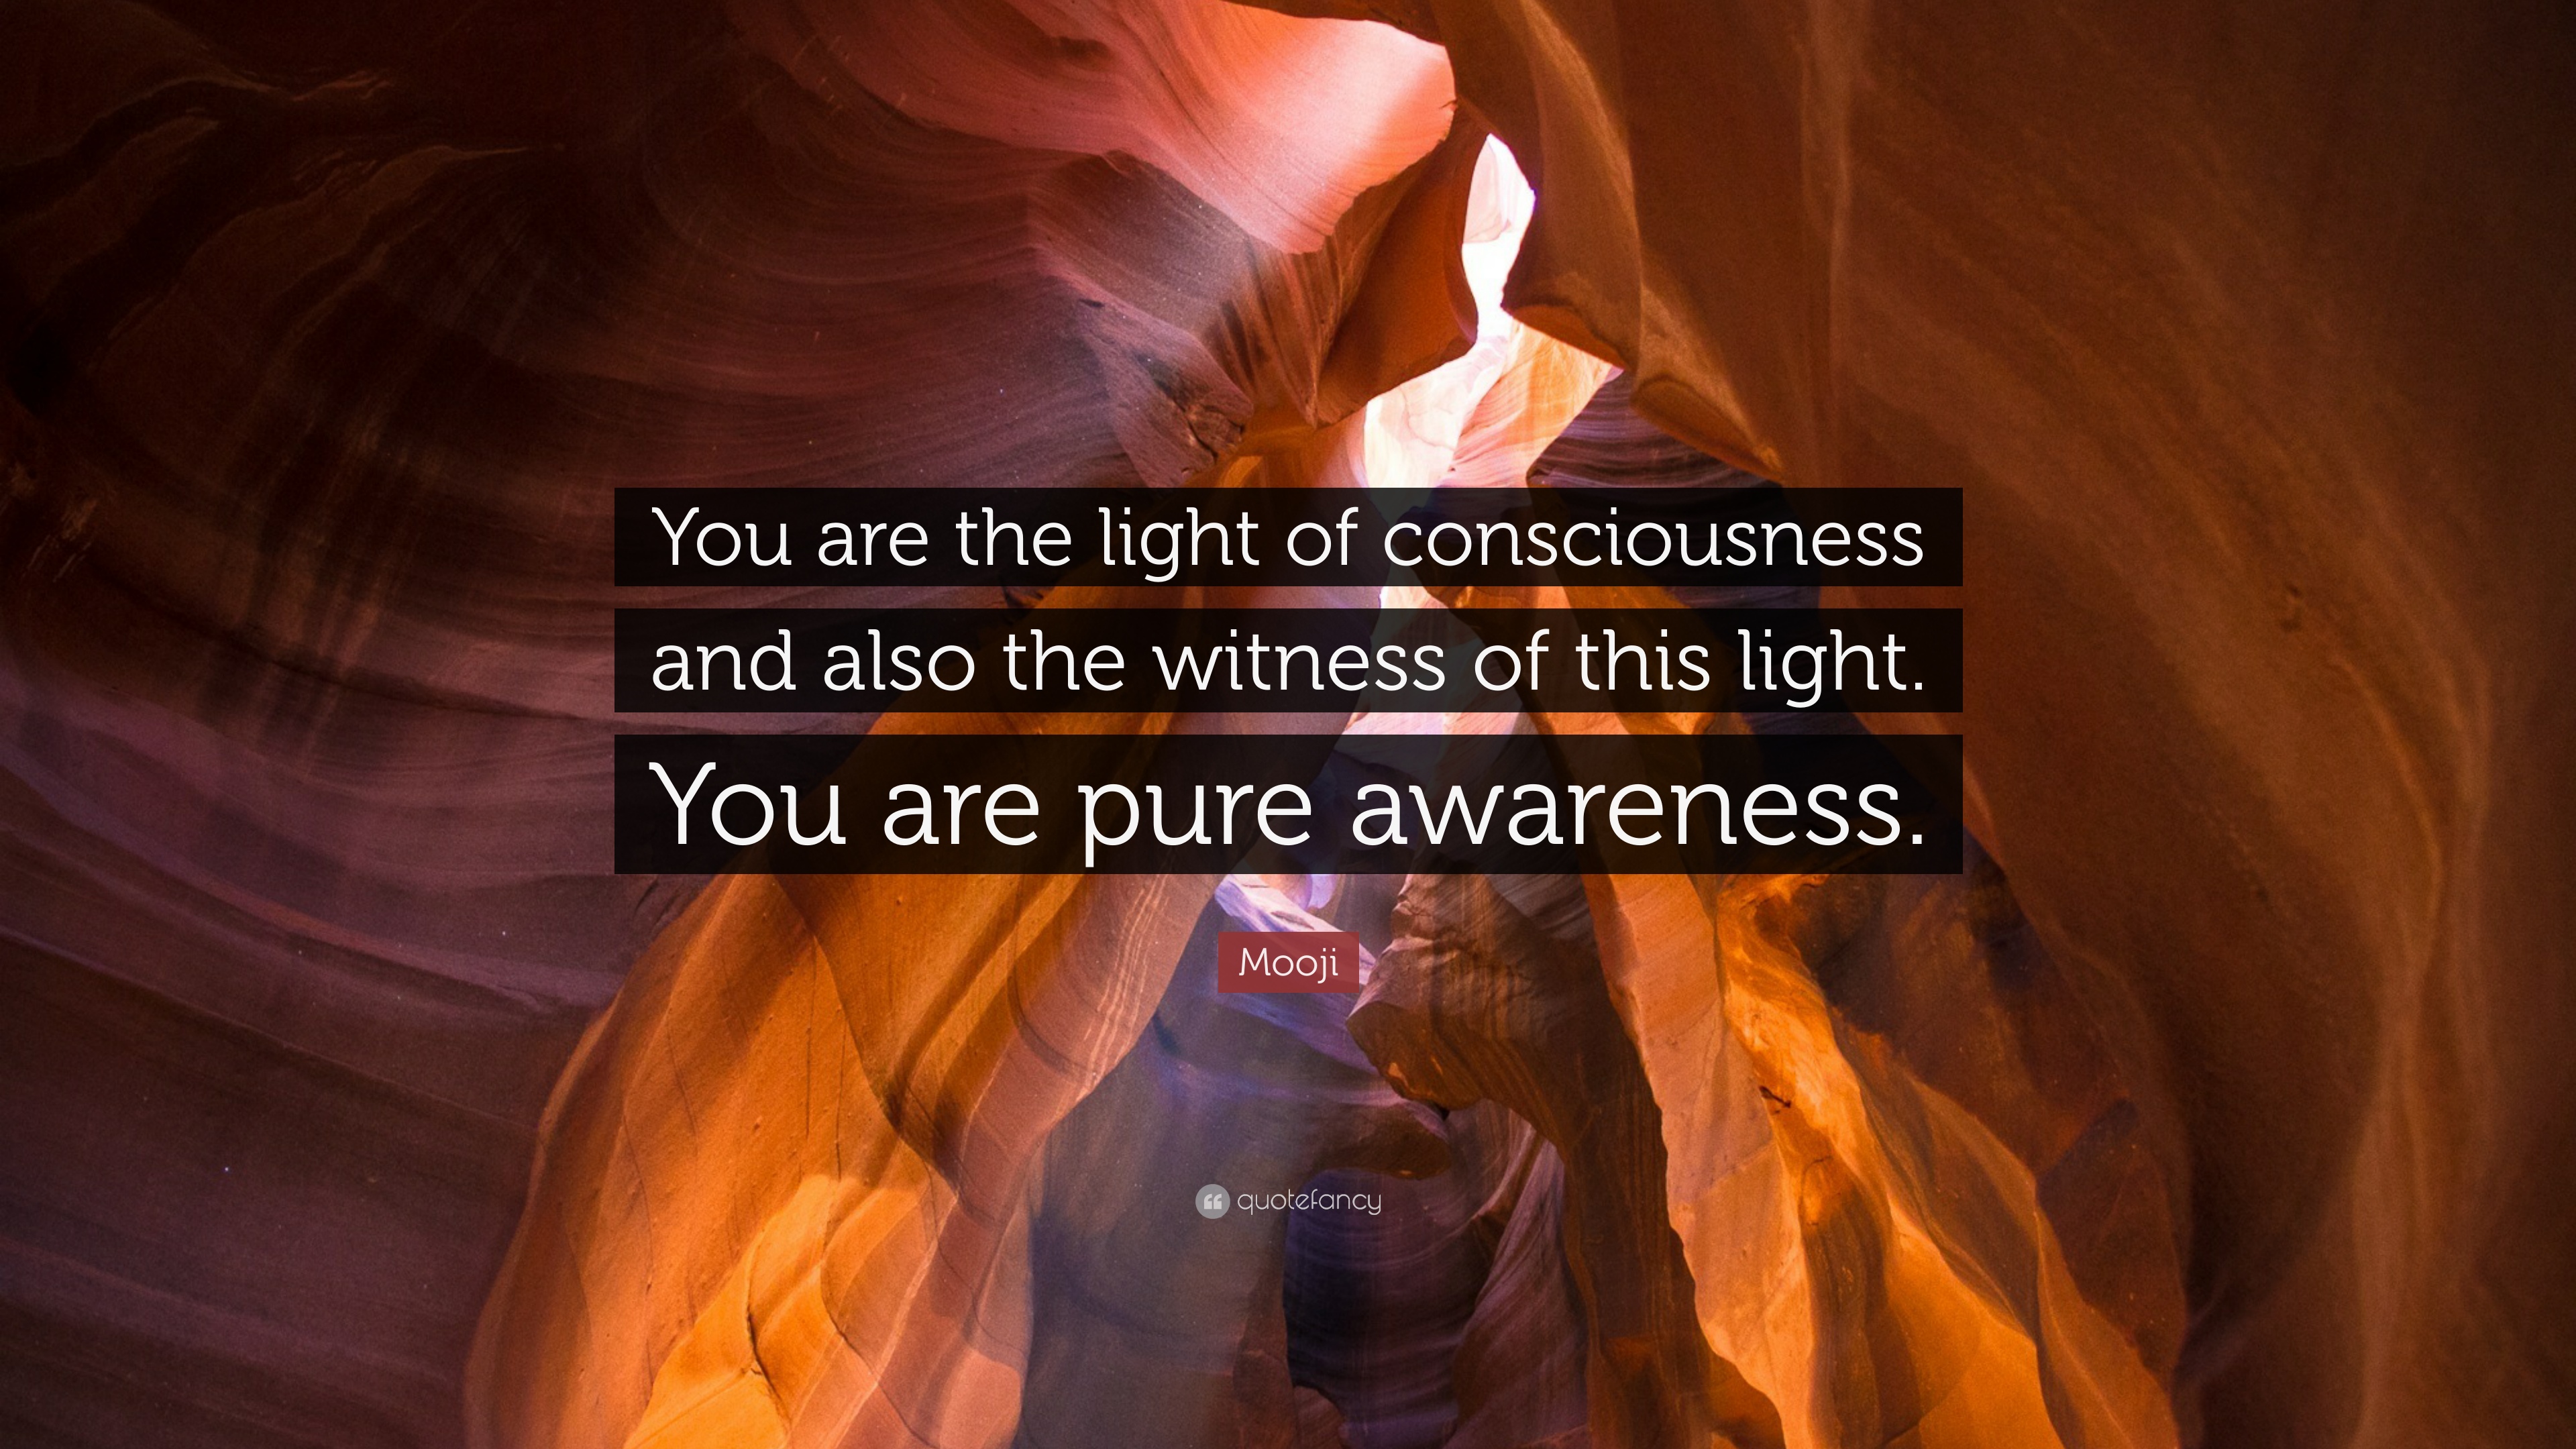 815242-Mooji-Quote-You-are-the-light-of-consciousness-and-also-the.jpg